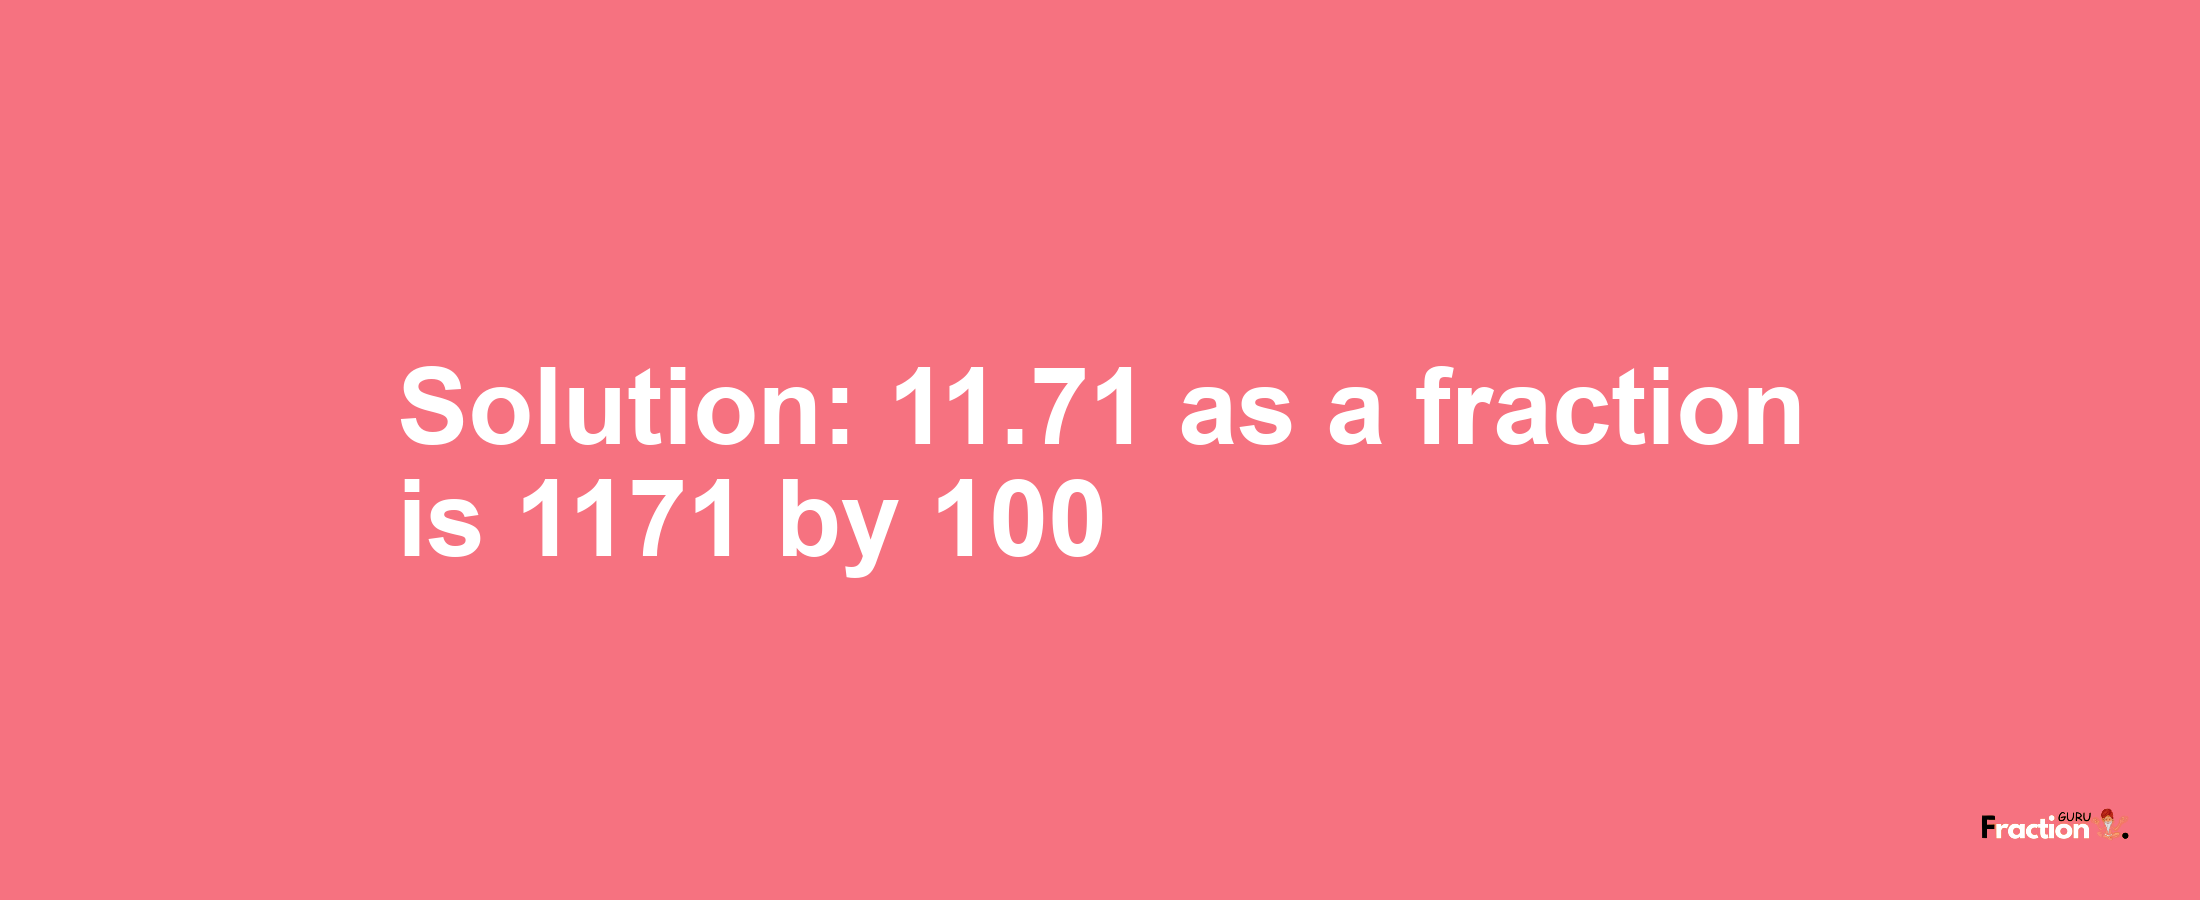 Solution:11.71 as a fraction is 1171/100